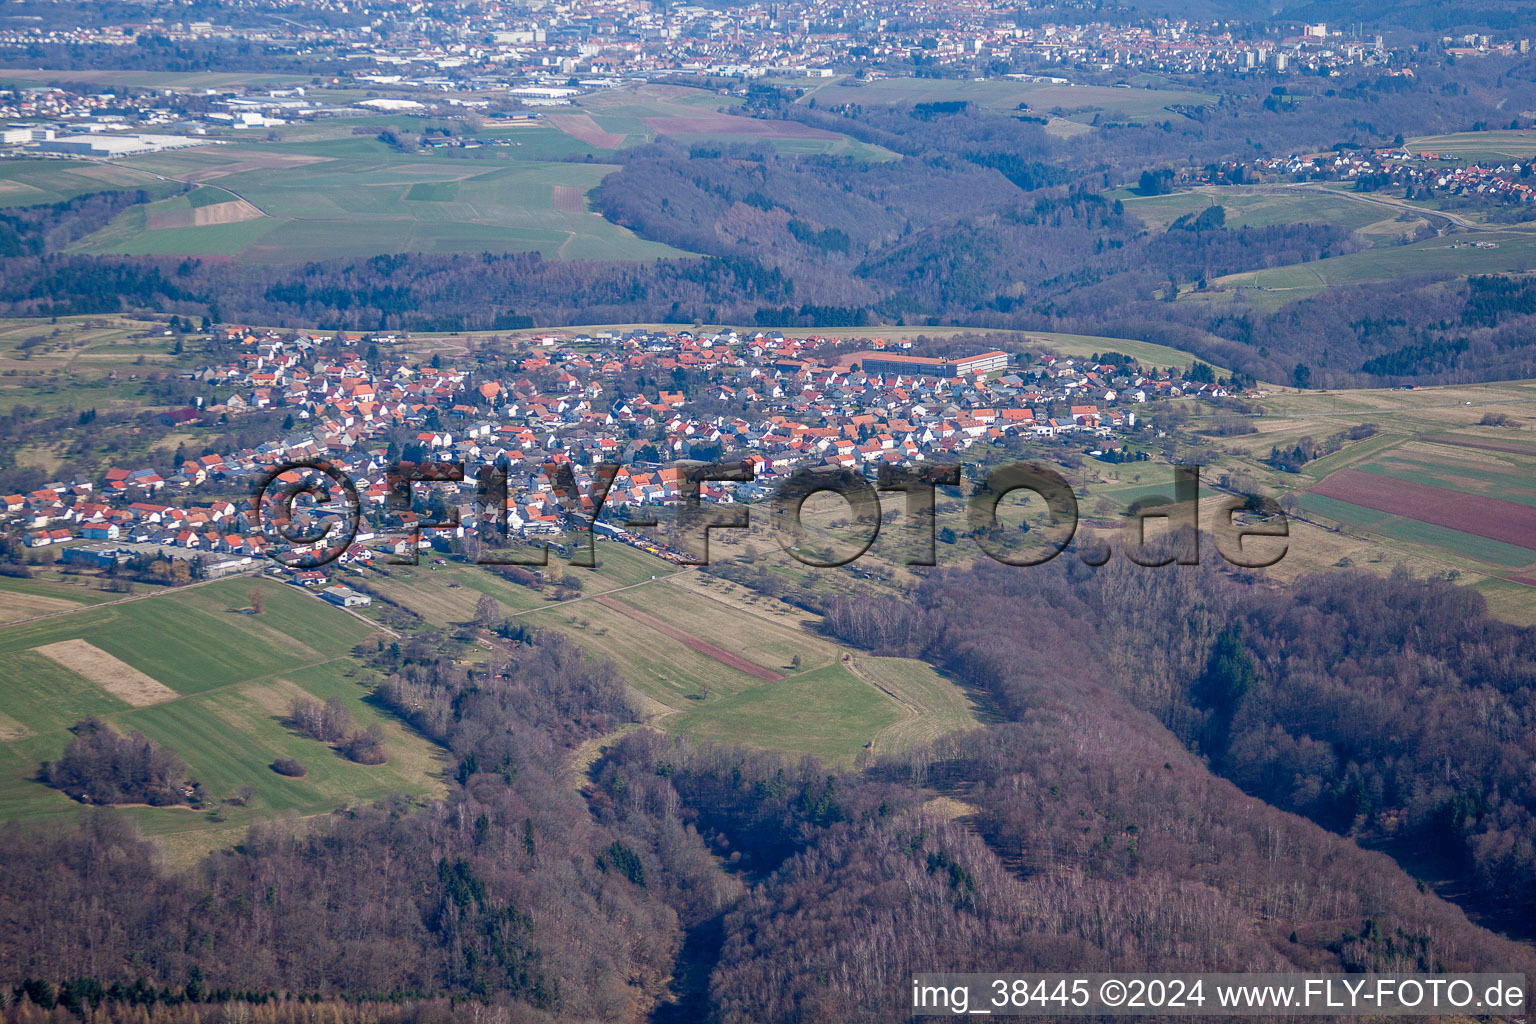 Aerial photograpy of Hilst in the state Rhineland-Palatinate, Germany